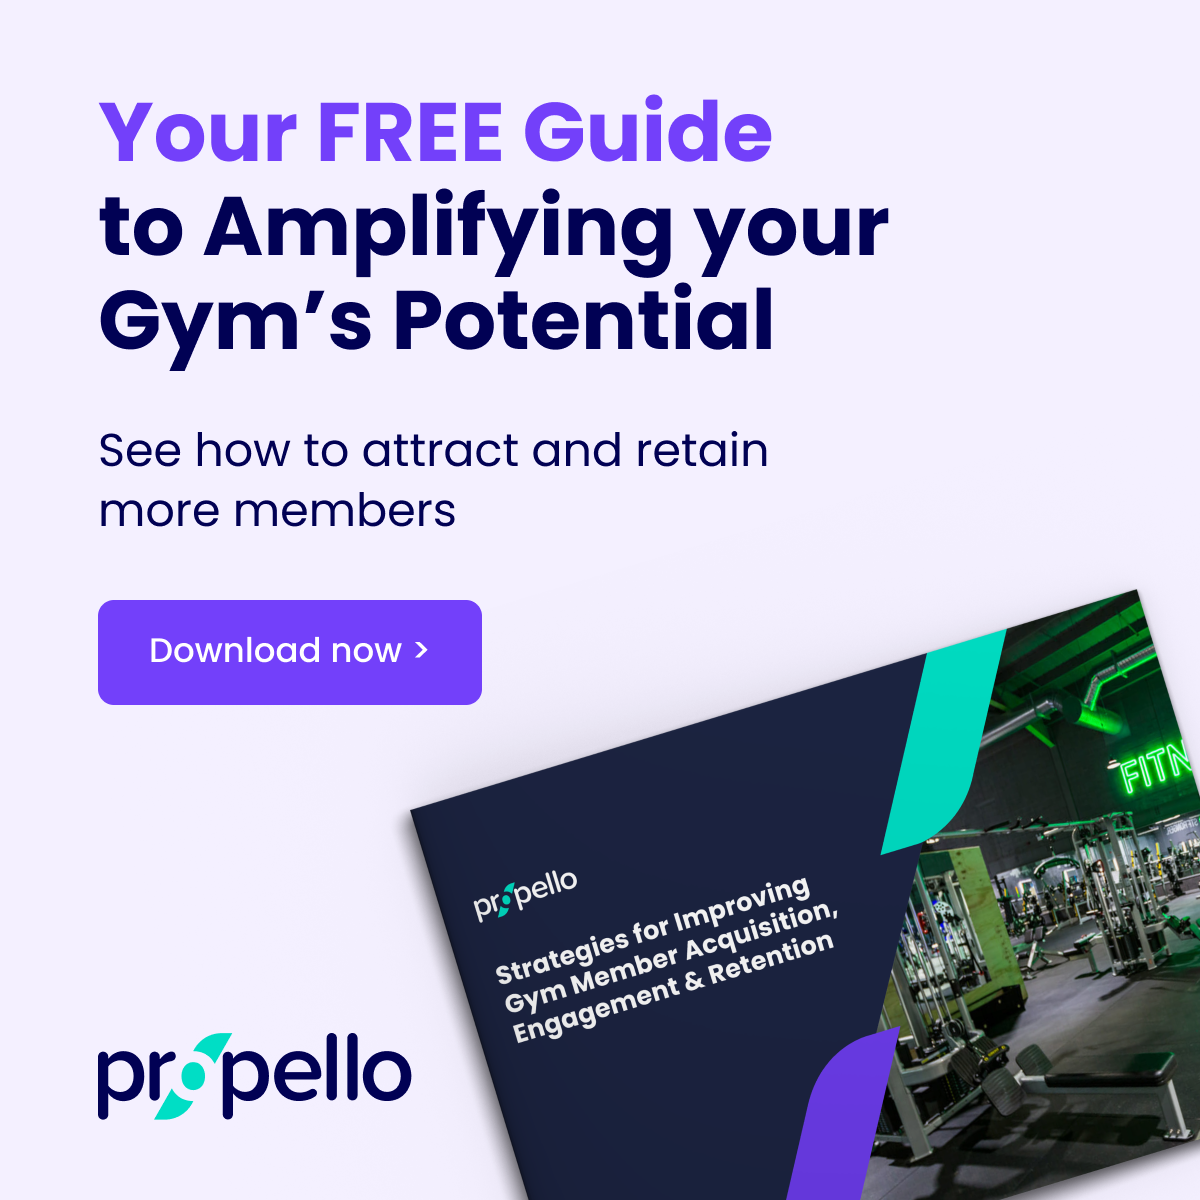 Strategies for Improving Gym Member Acquisition, Engagement & Retention